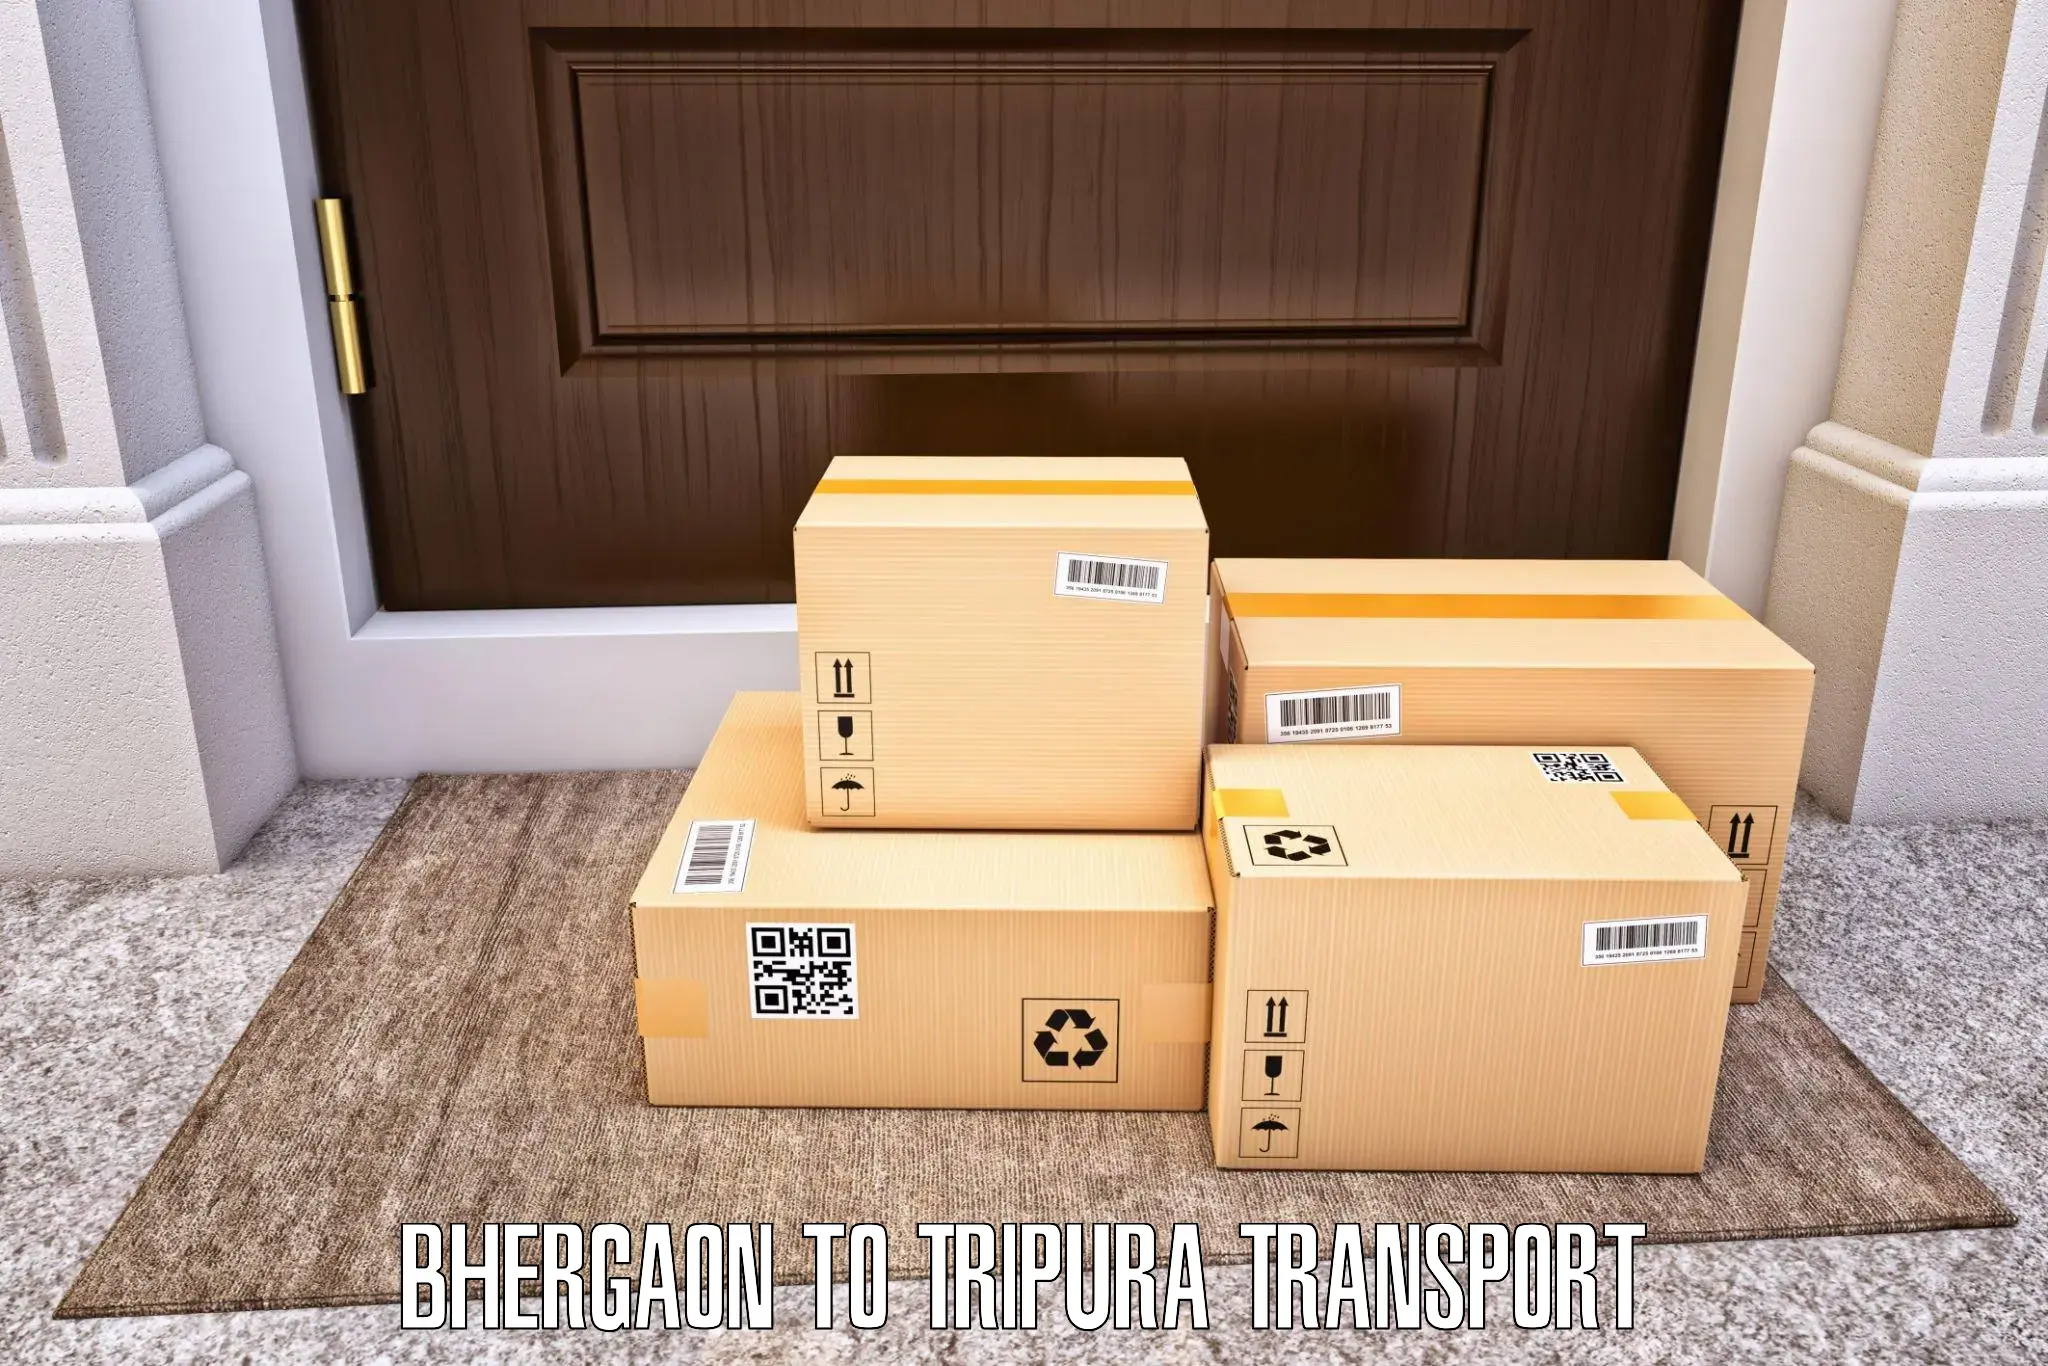 Part load transport service in India Bhergaon to Tripura